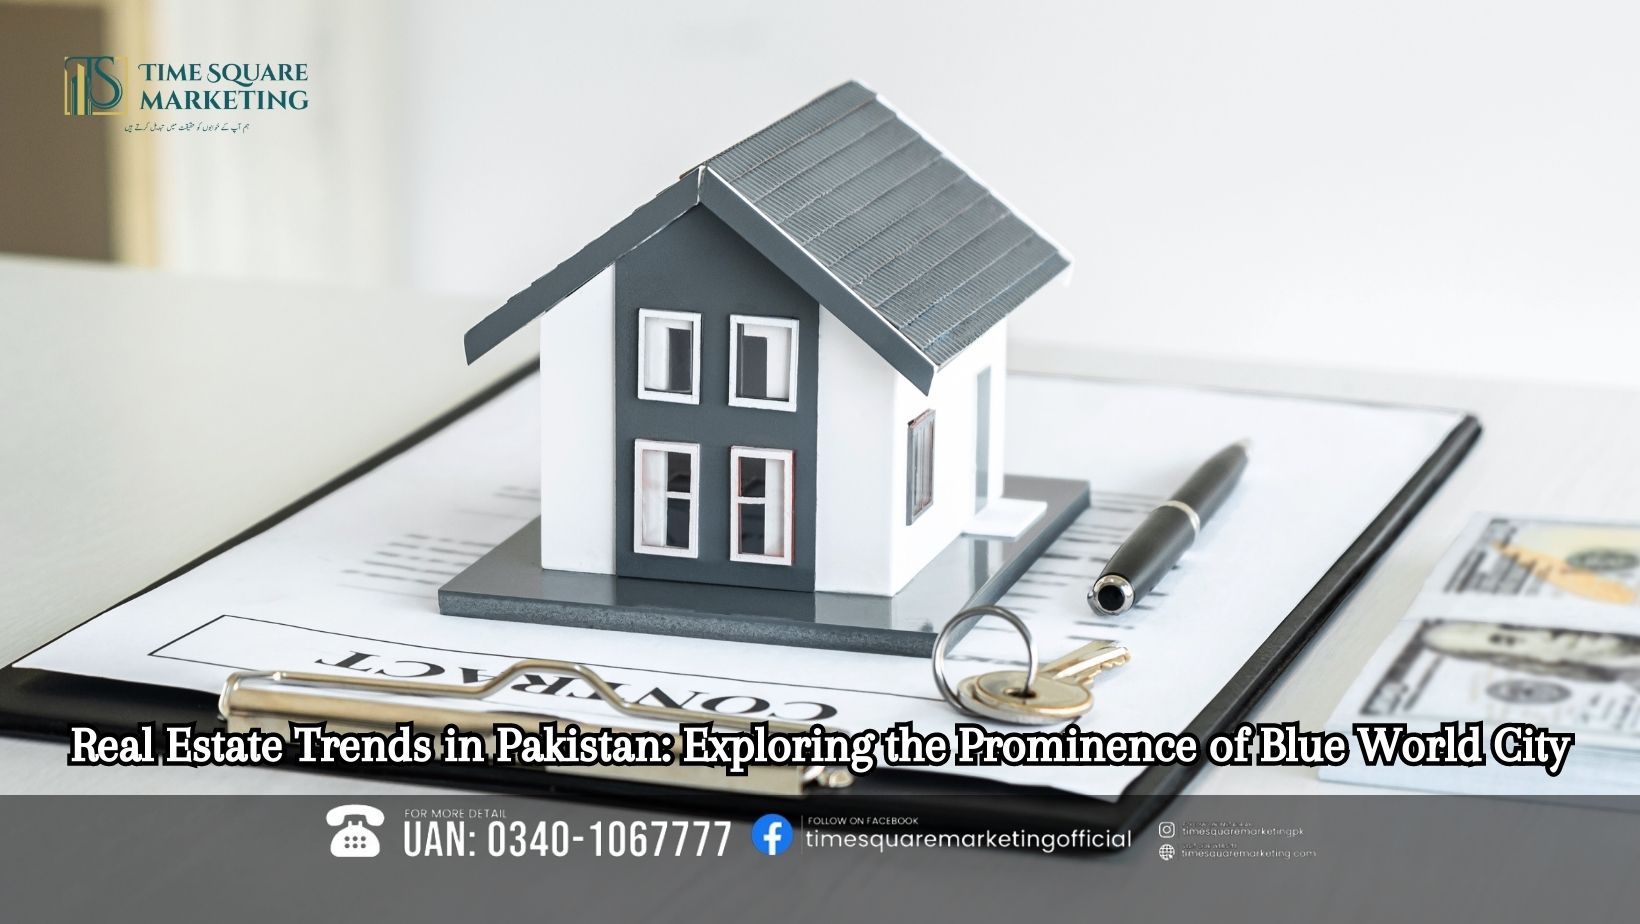 Real Estate Trends in Pakistan Exploring the Prominence of Blue World City